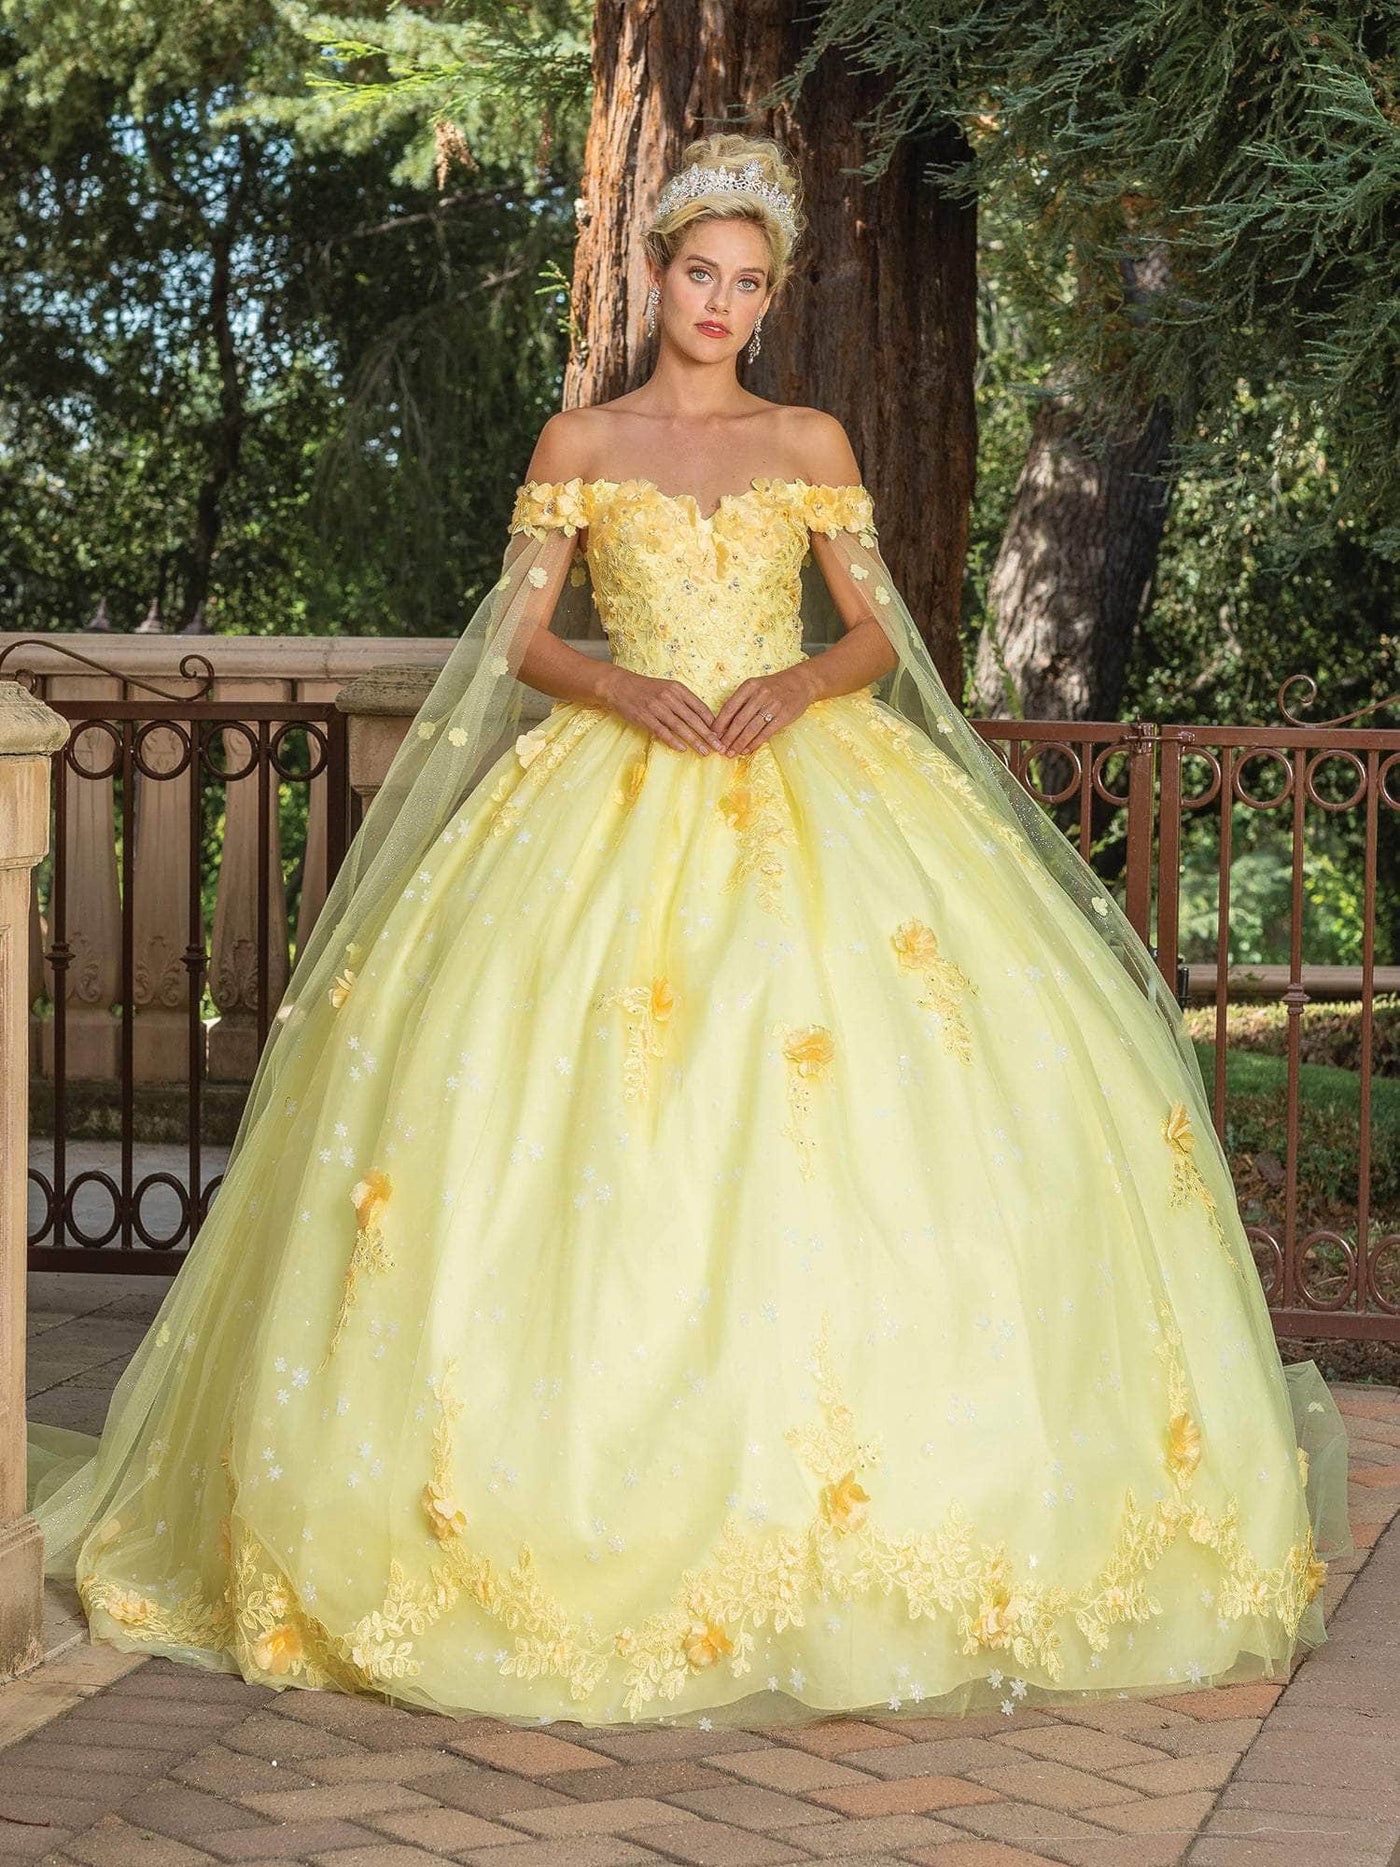 Dancing Queen 1789 - Sheer Cape Sleeve Ballgown Special Occasion Dress